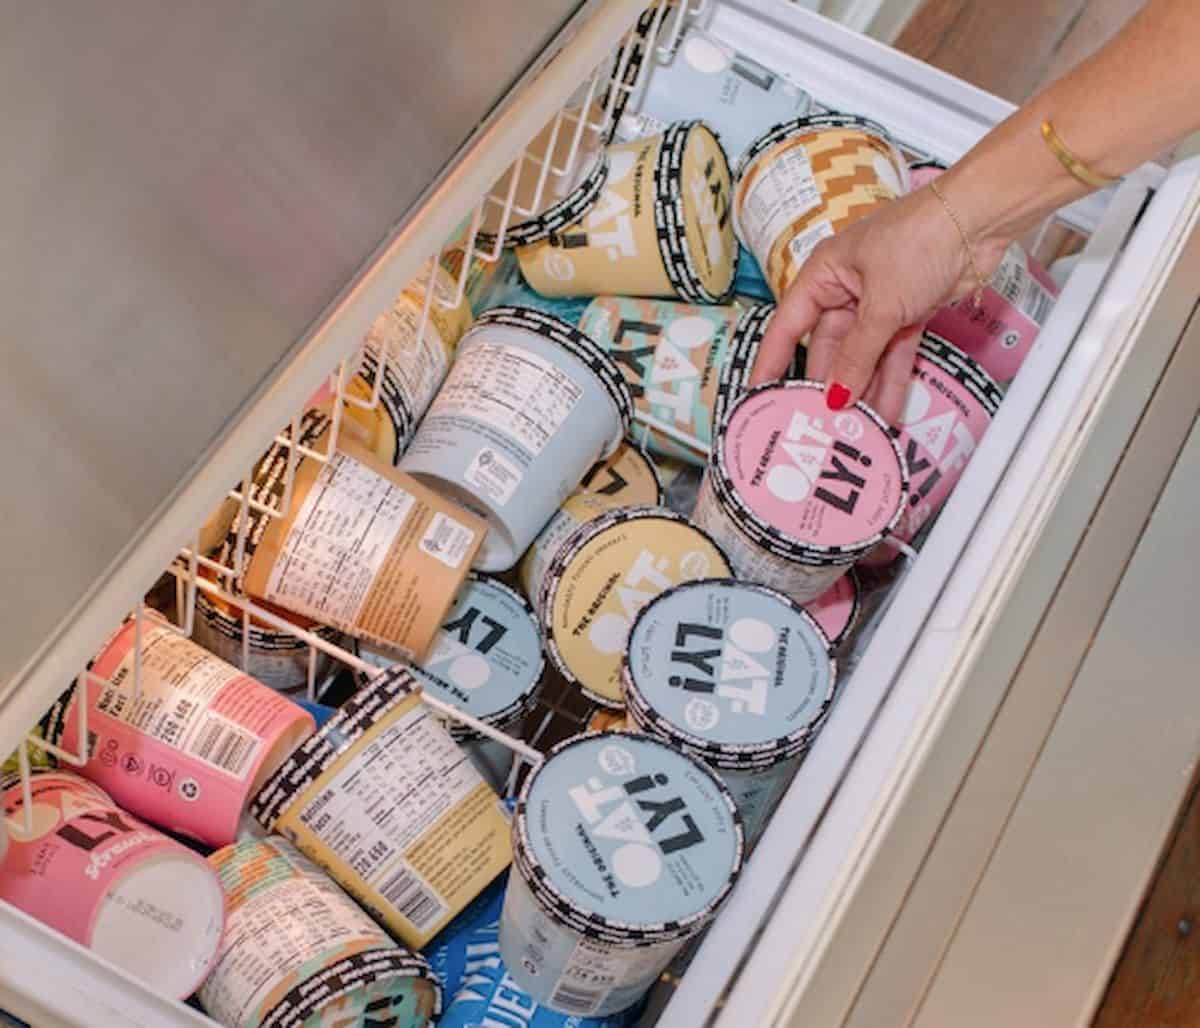 Freezer full of pints of Oatly oat-based ice cream with a hand reaching in to grab one.